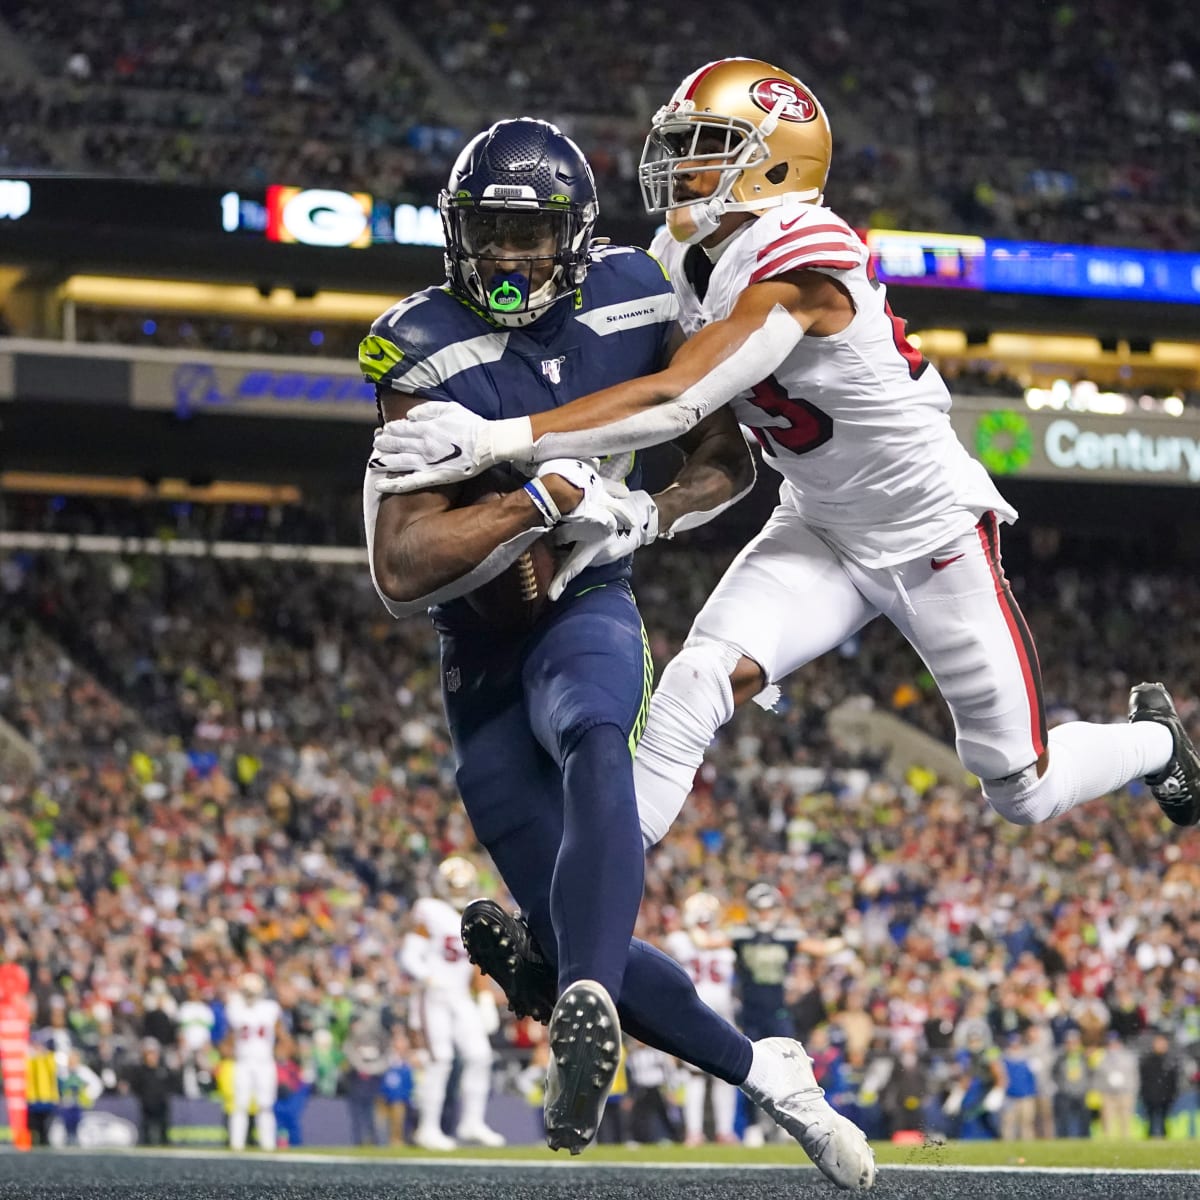 Seahawks receivers DK Metcalf, Tyler Lockett fight through injuries to play  in win over 49ers